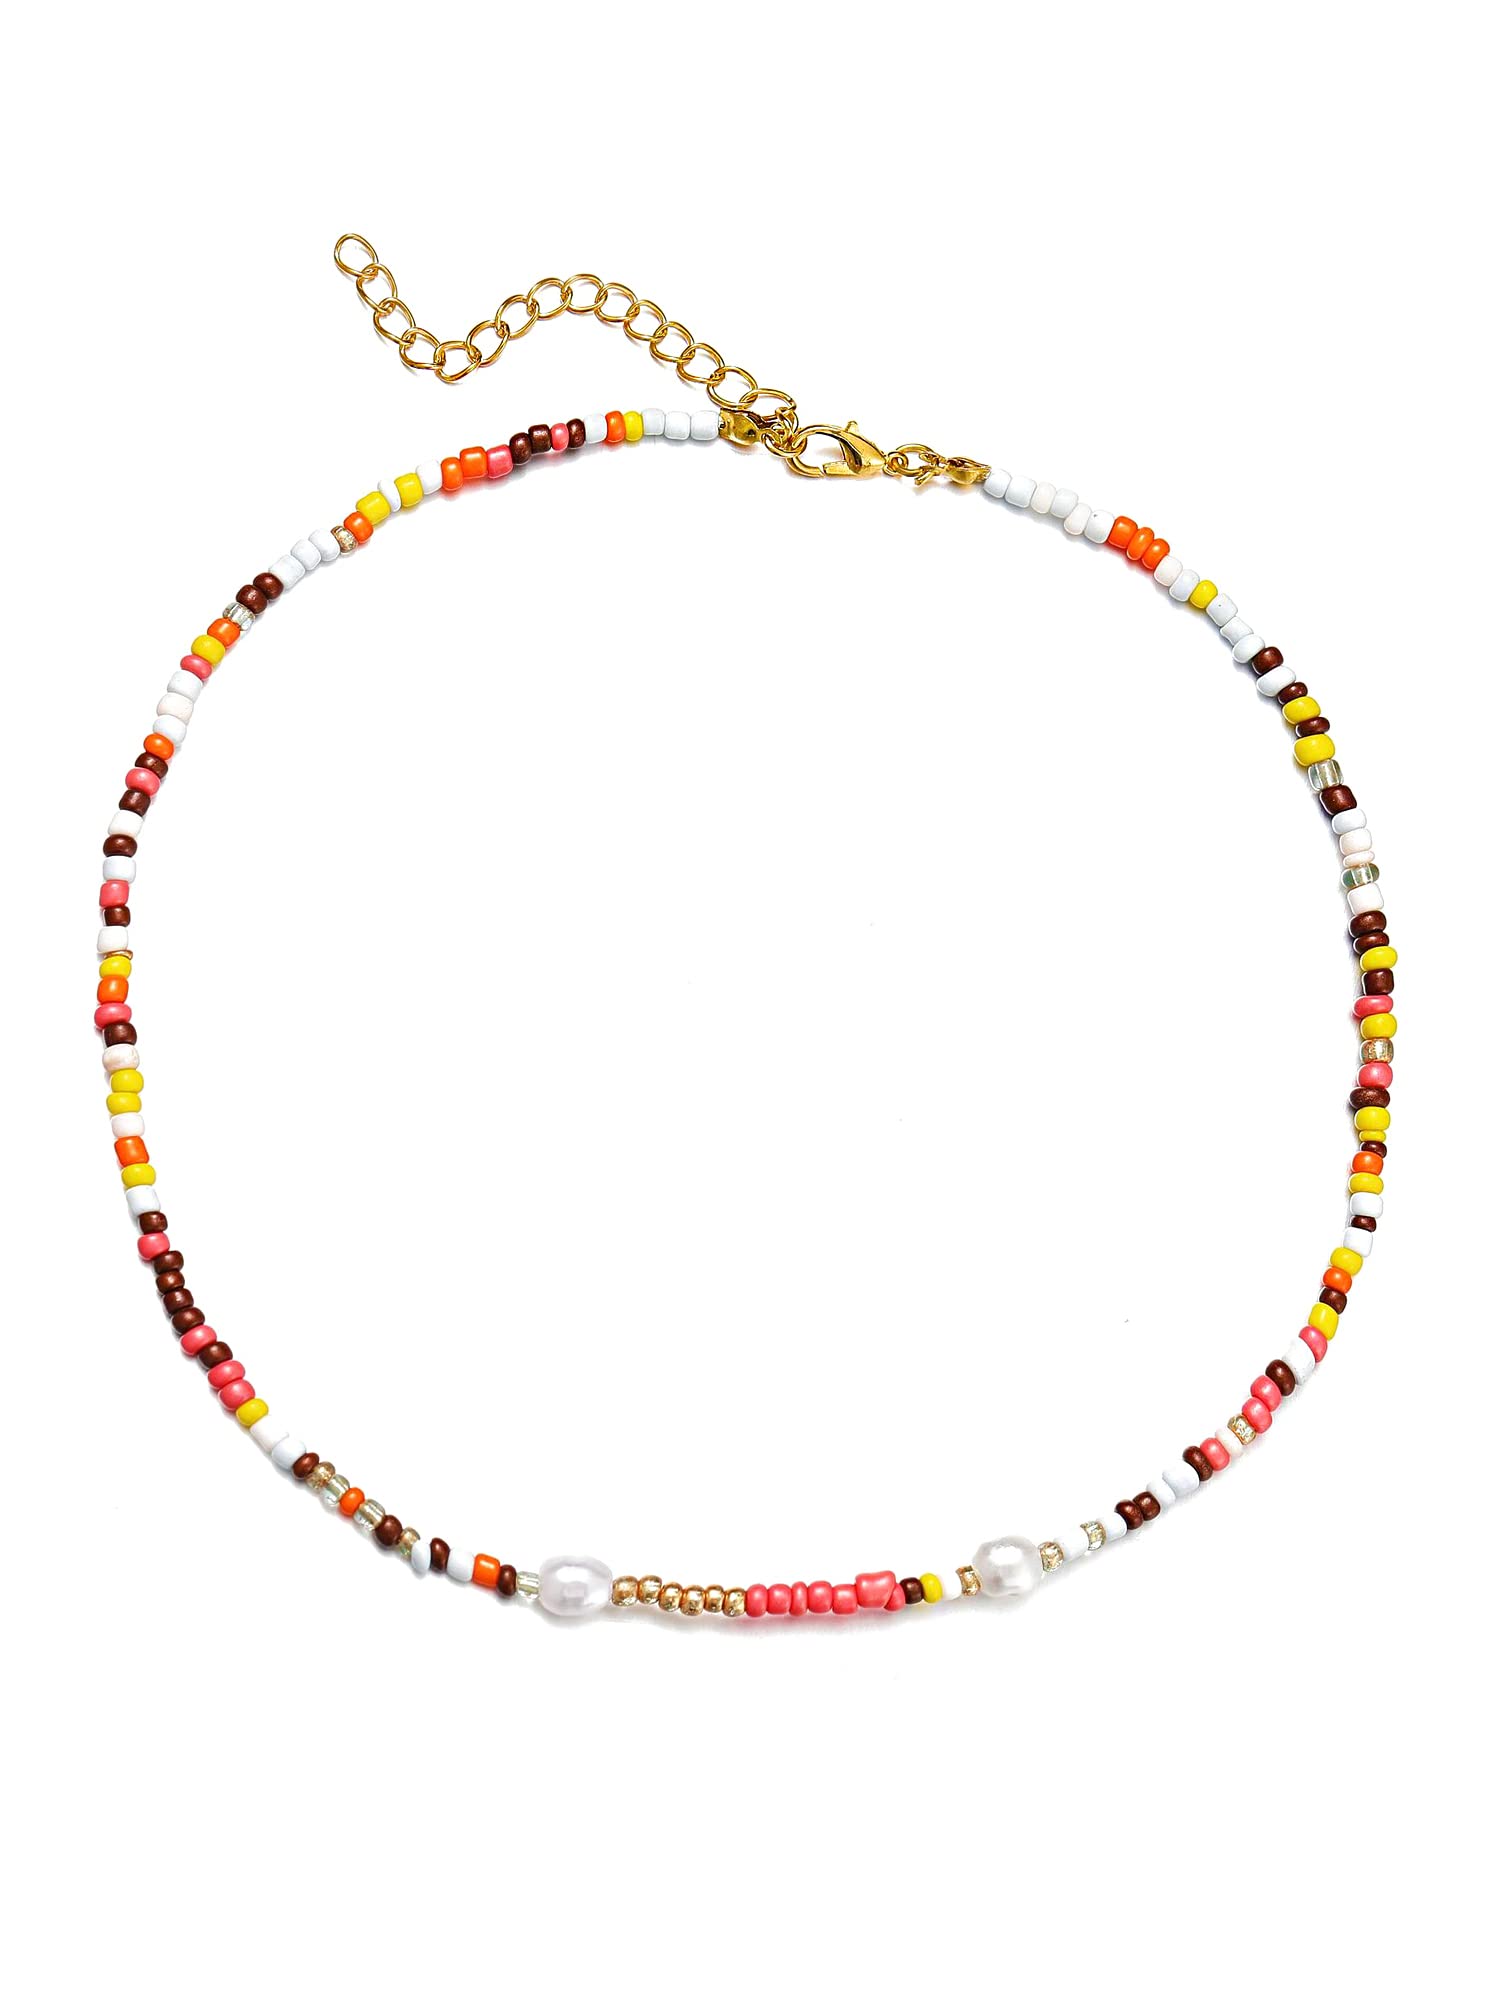 Yellow Chimes Necklace for Women and Girls Layered Necklace for Women | Multicolor Beads with Charm Multilayer Chain Necklace For women | Birthday Gift for girls and women Anniversary Gift for Wife